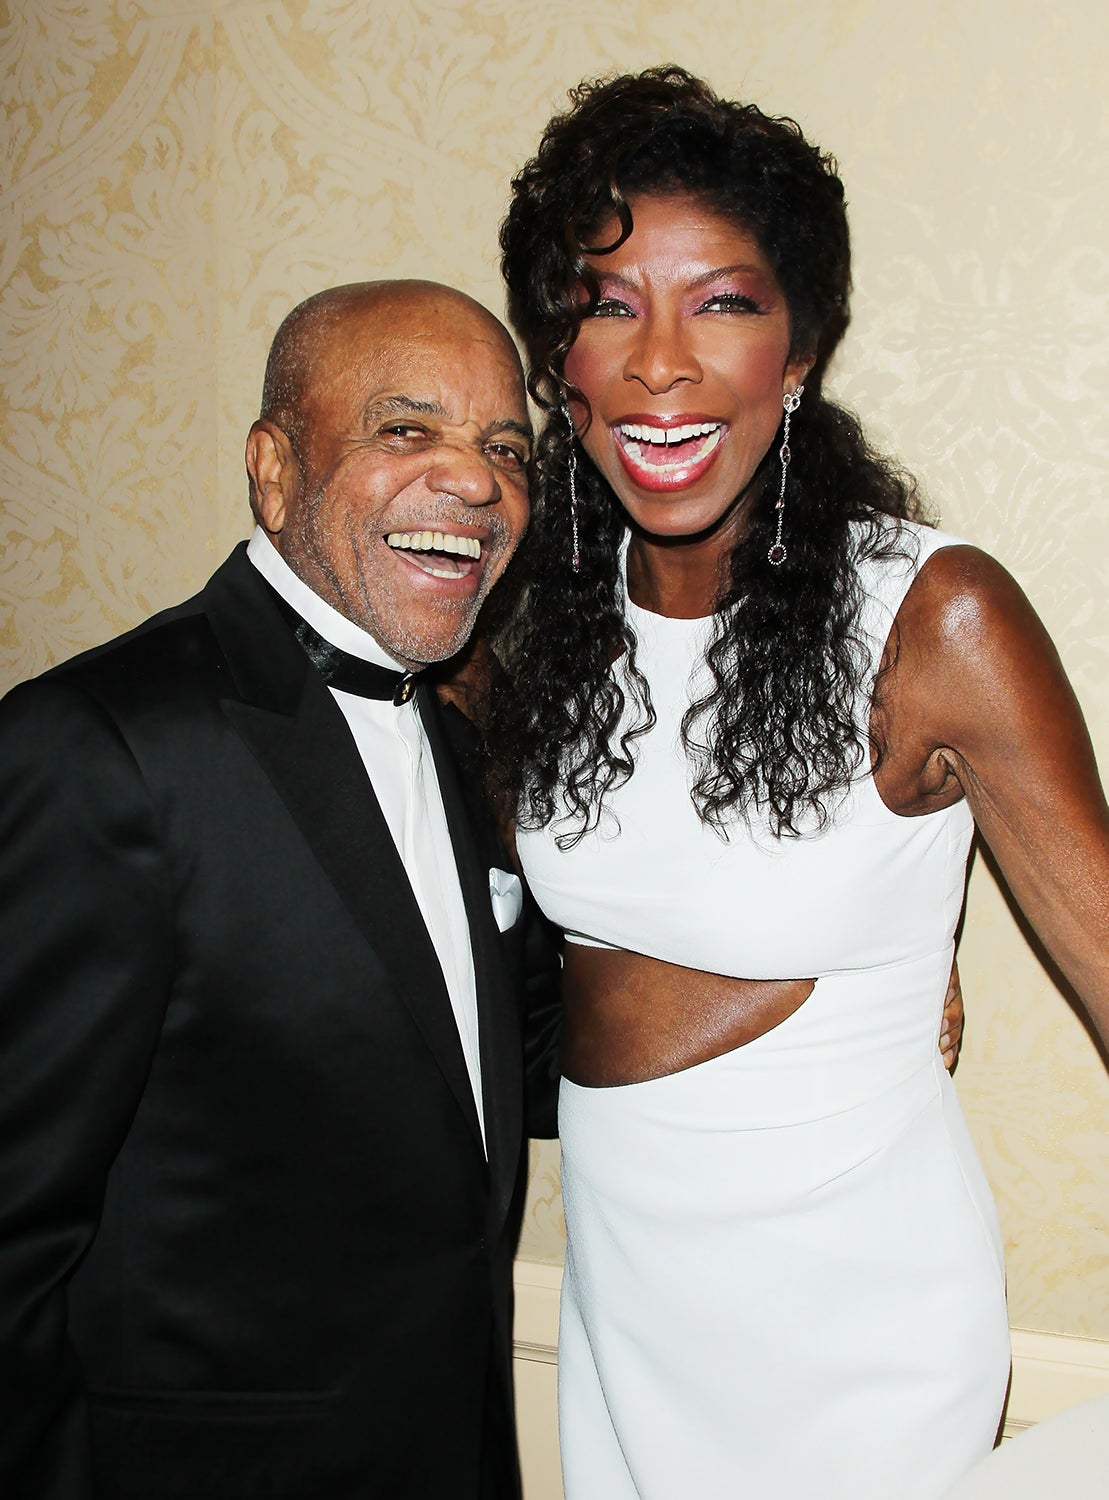 Unforgettable: Natalie Cole's Life in Pictures - Essence